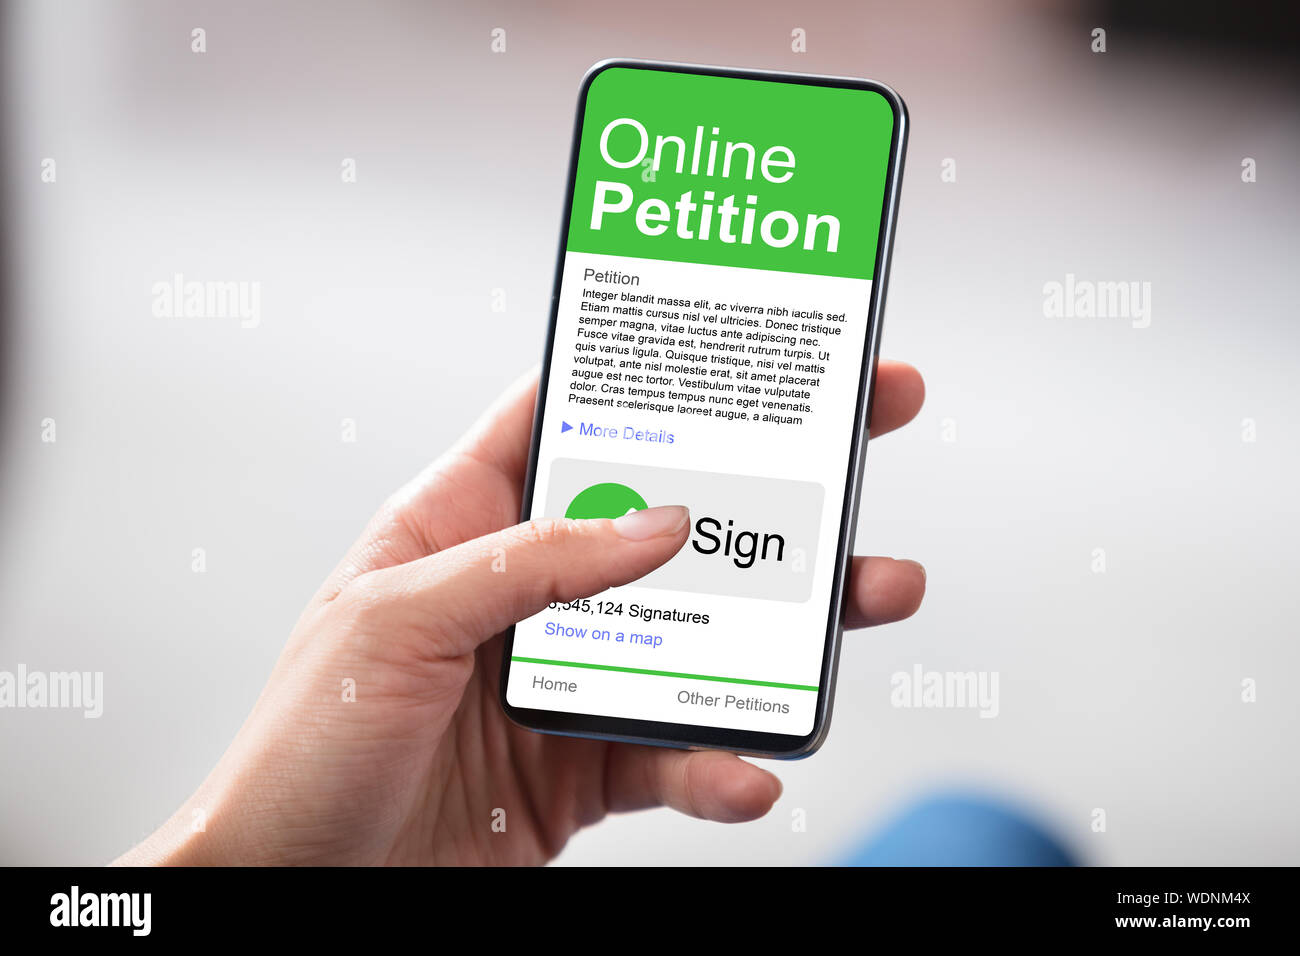 Influential figures sign online petition in defense of